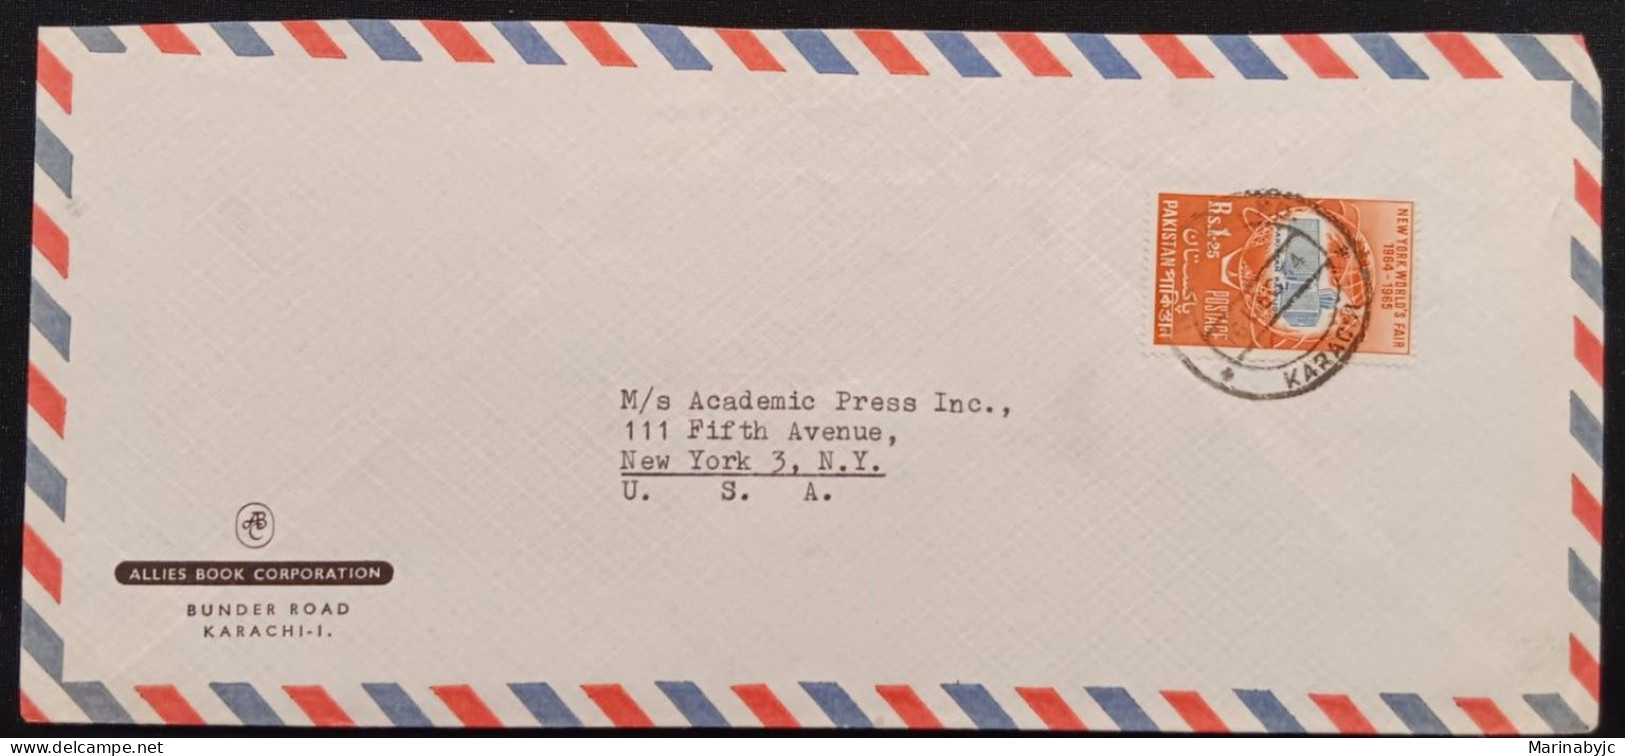 DM)1964, PAKISTAN, LETTER SENT TO U.S.A, AIR MAIL, WITH NEW YORK UNIVERSAL EXHIBITION STAMP, XF - Pakistan